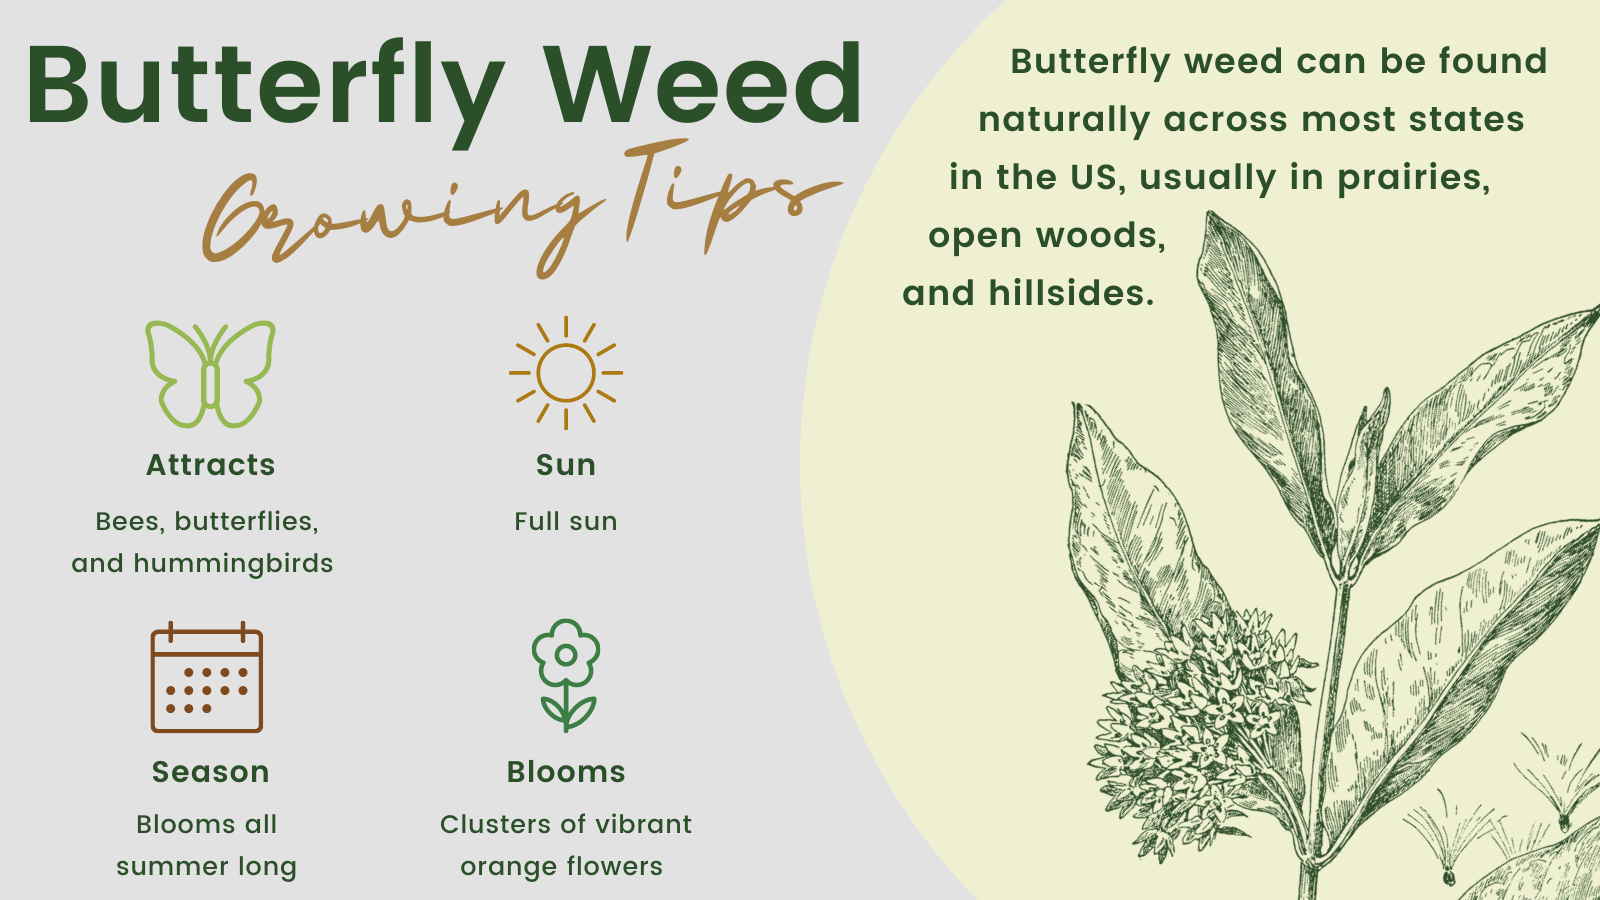 Butterfly Weed Growing Tips: Butterfly weed can be found naturally across most states in the US, usually in prairies, open woods, and hillsides. Attracts: Bees, butterflies, and hummingbirds. Sun: Full sun. Season: Blooms all summer long. Blooms: Clusters of vibrant orange flowers.